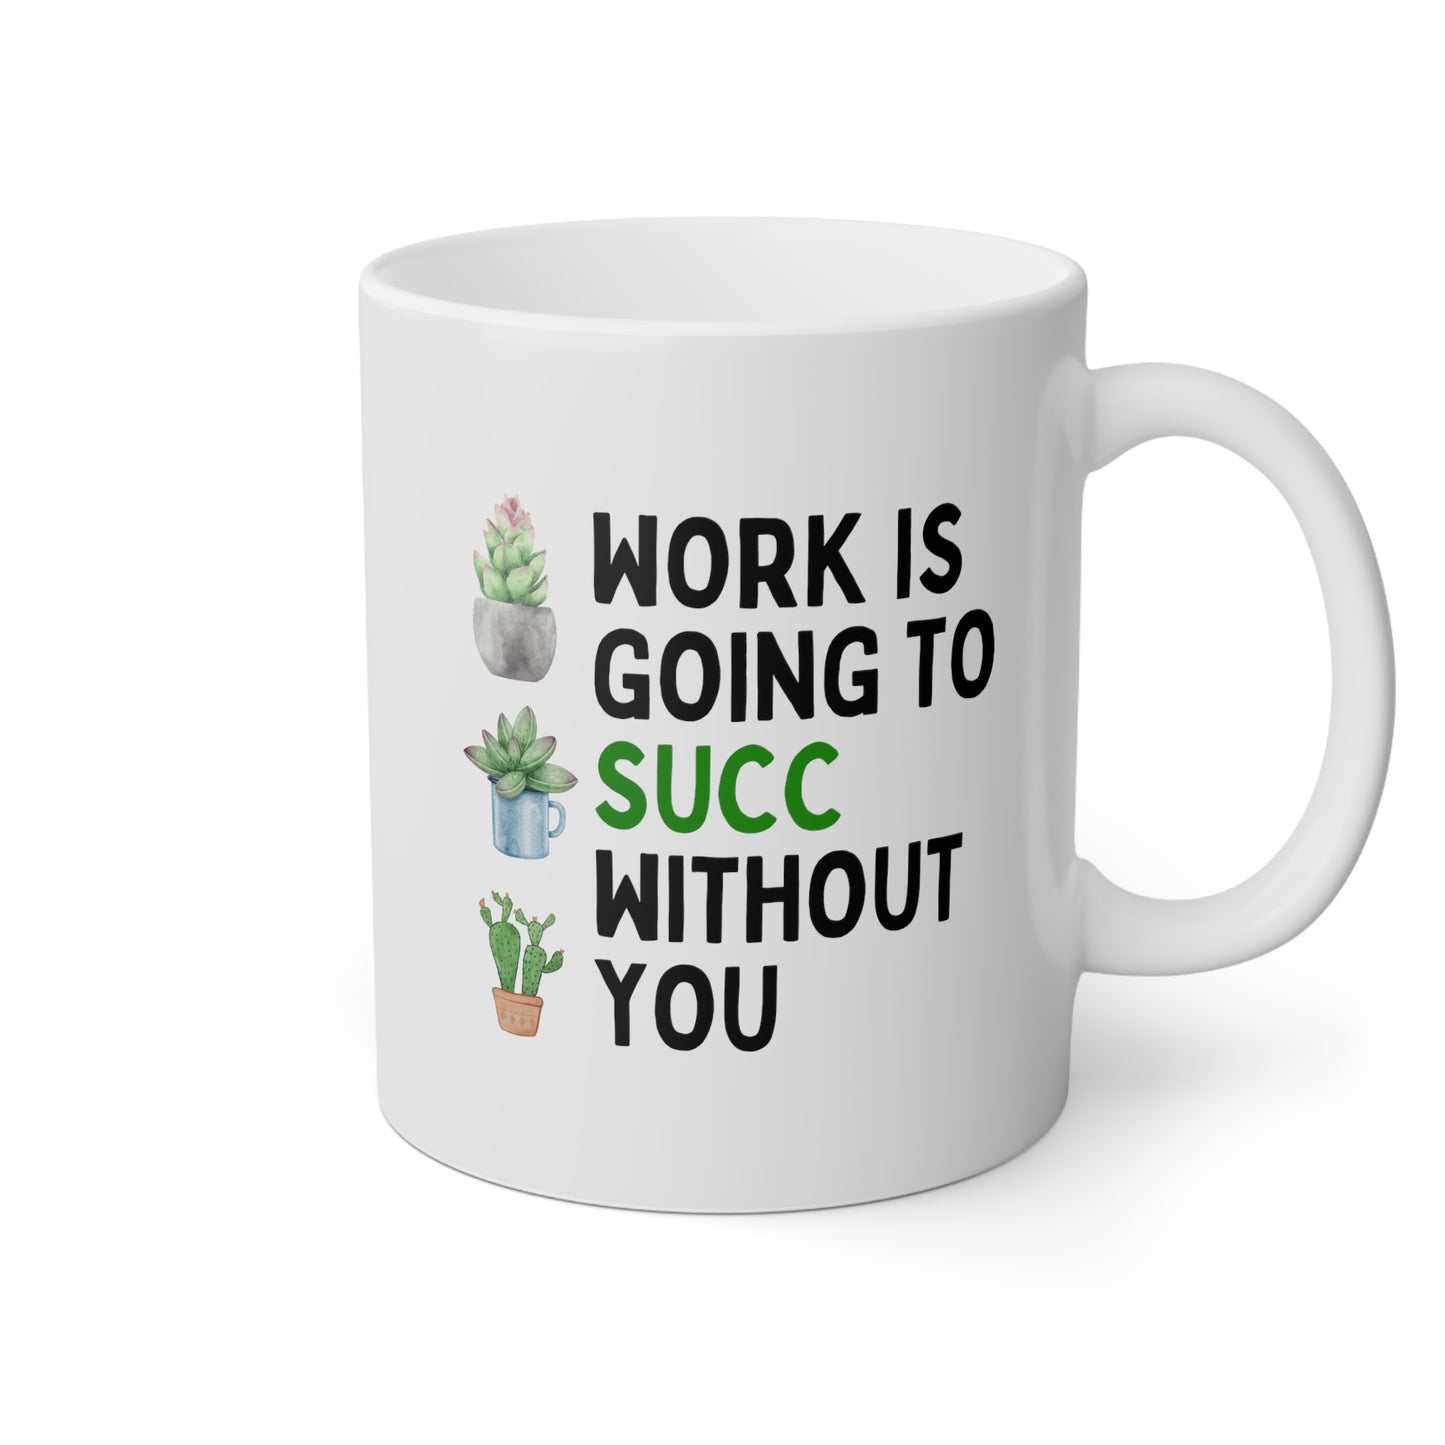 Work Is Going To Succ Without You 11oz white funny large coffee mug gift for coworker colleague leaving farewell plant lover succulents waveywares wavey wares wavywares wavy wares